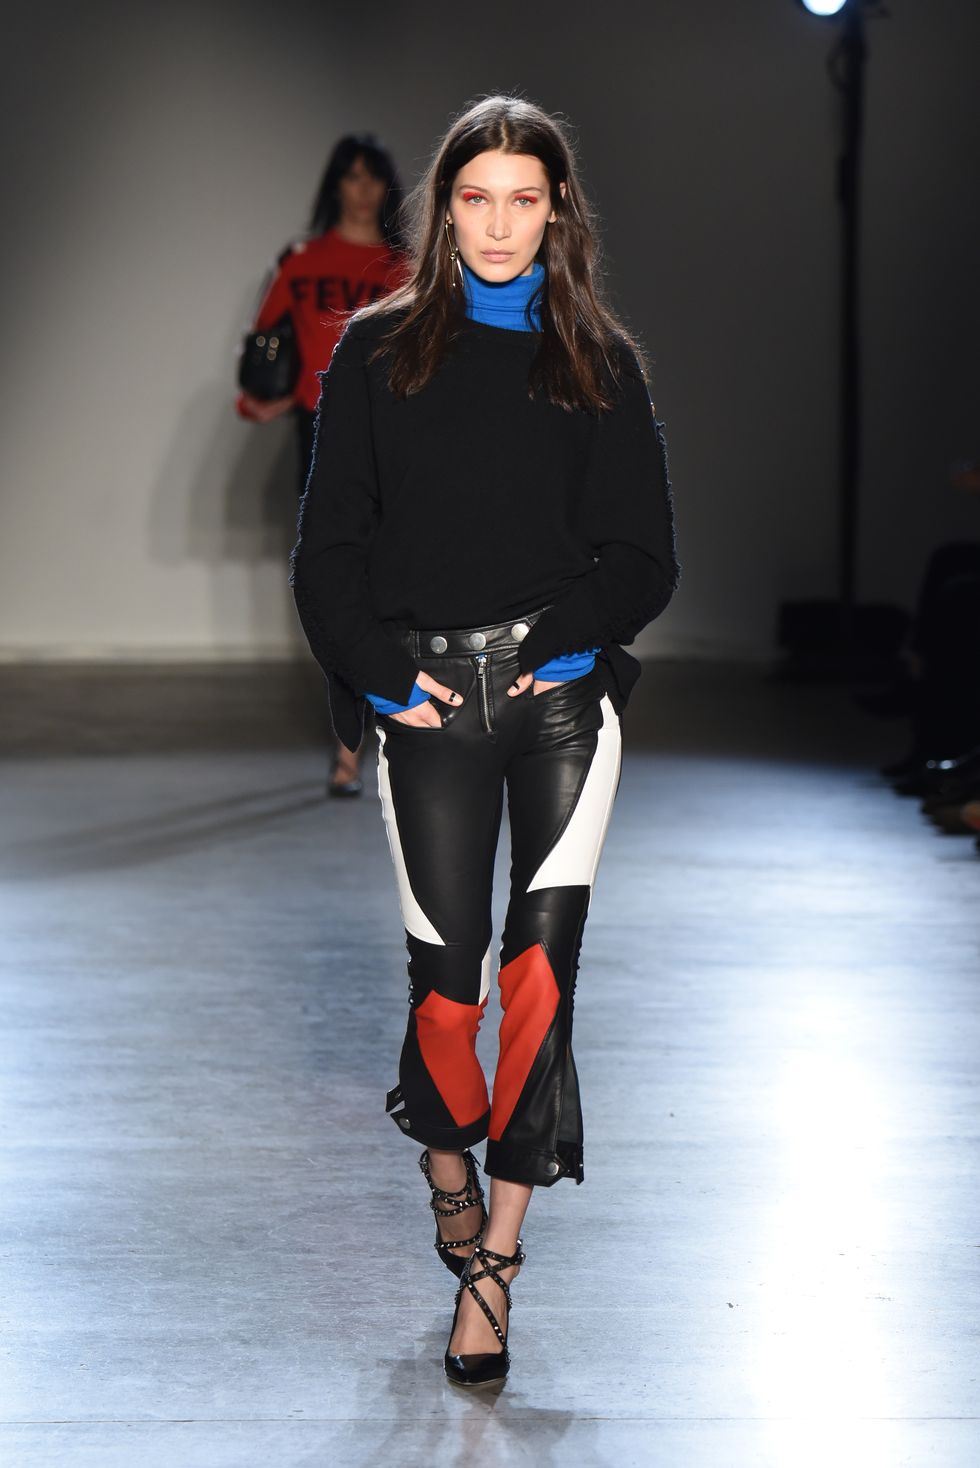 NEW YORK, NY - FEBRUARY 13:  Model Bella Hadid walks the runway at the Zagdig & Voltaire fashion show during New York Fashion Week at Skylight Modern on February 13, 2017 in New York City.  (Photo by Albert Urso/Getty Images)